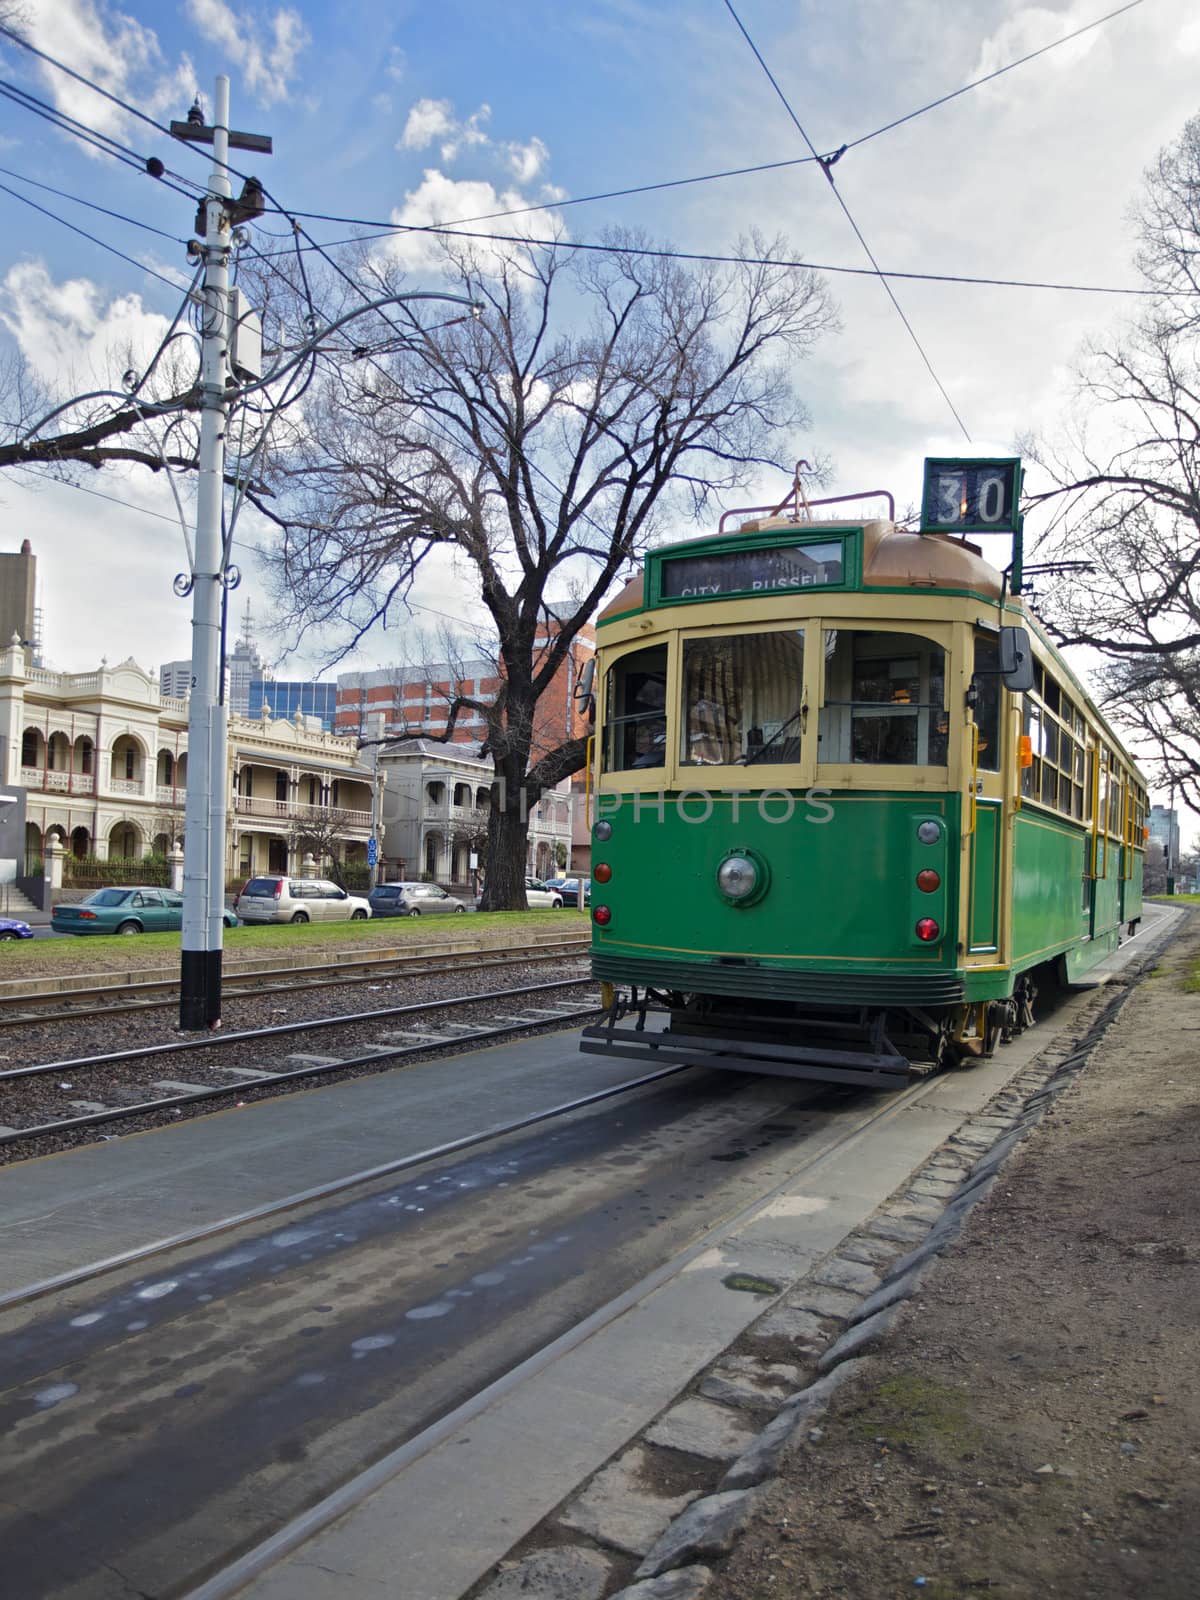 Trams in Melbourne by instinia